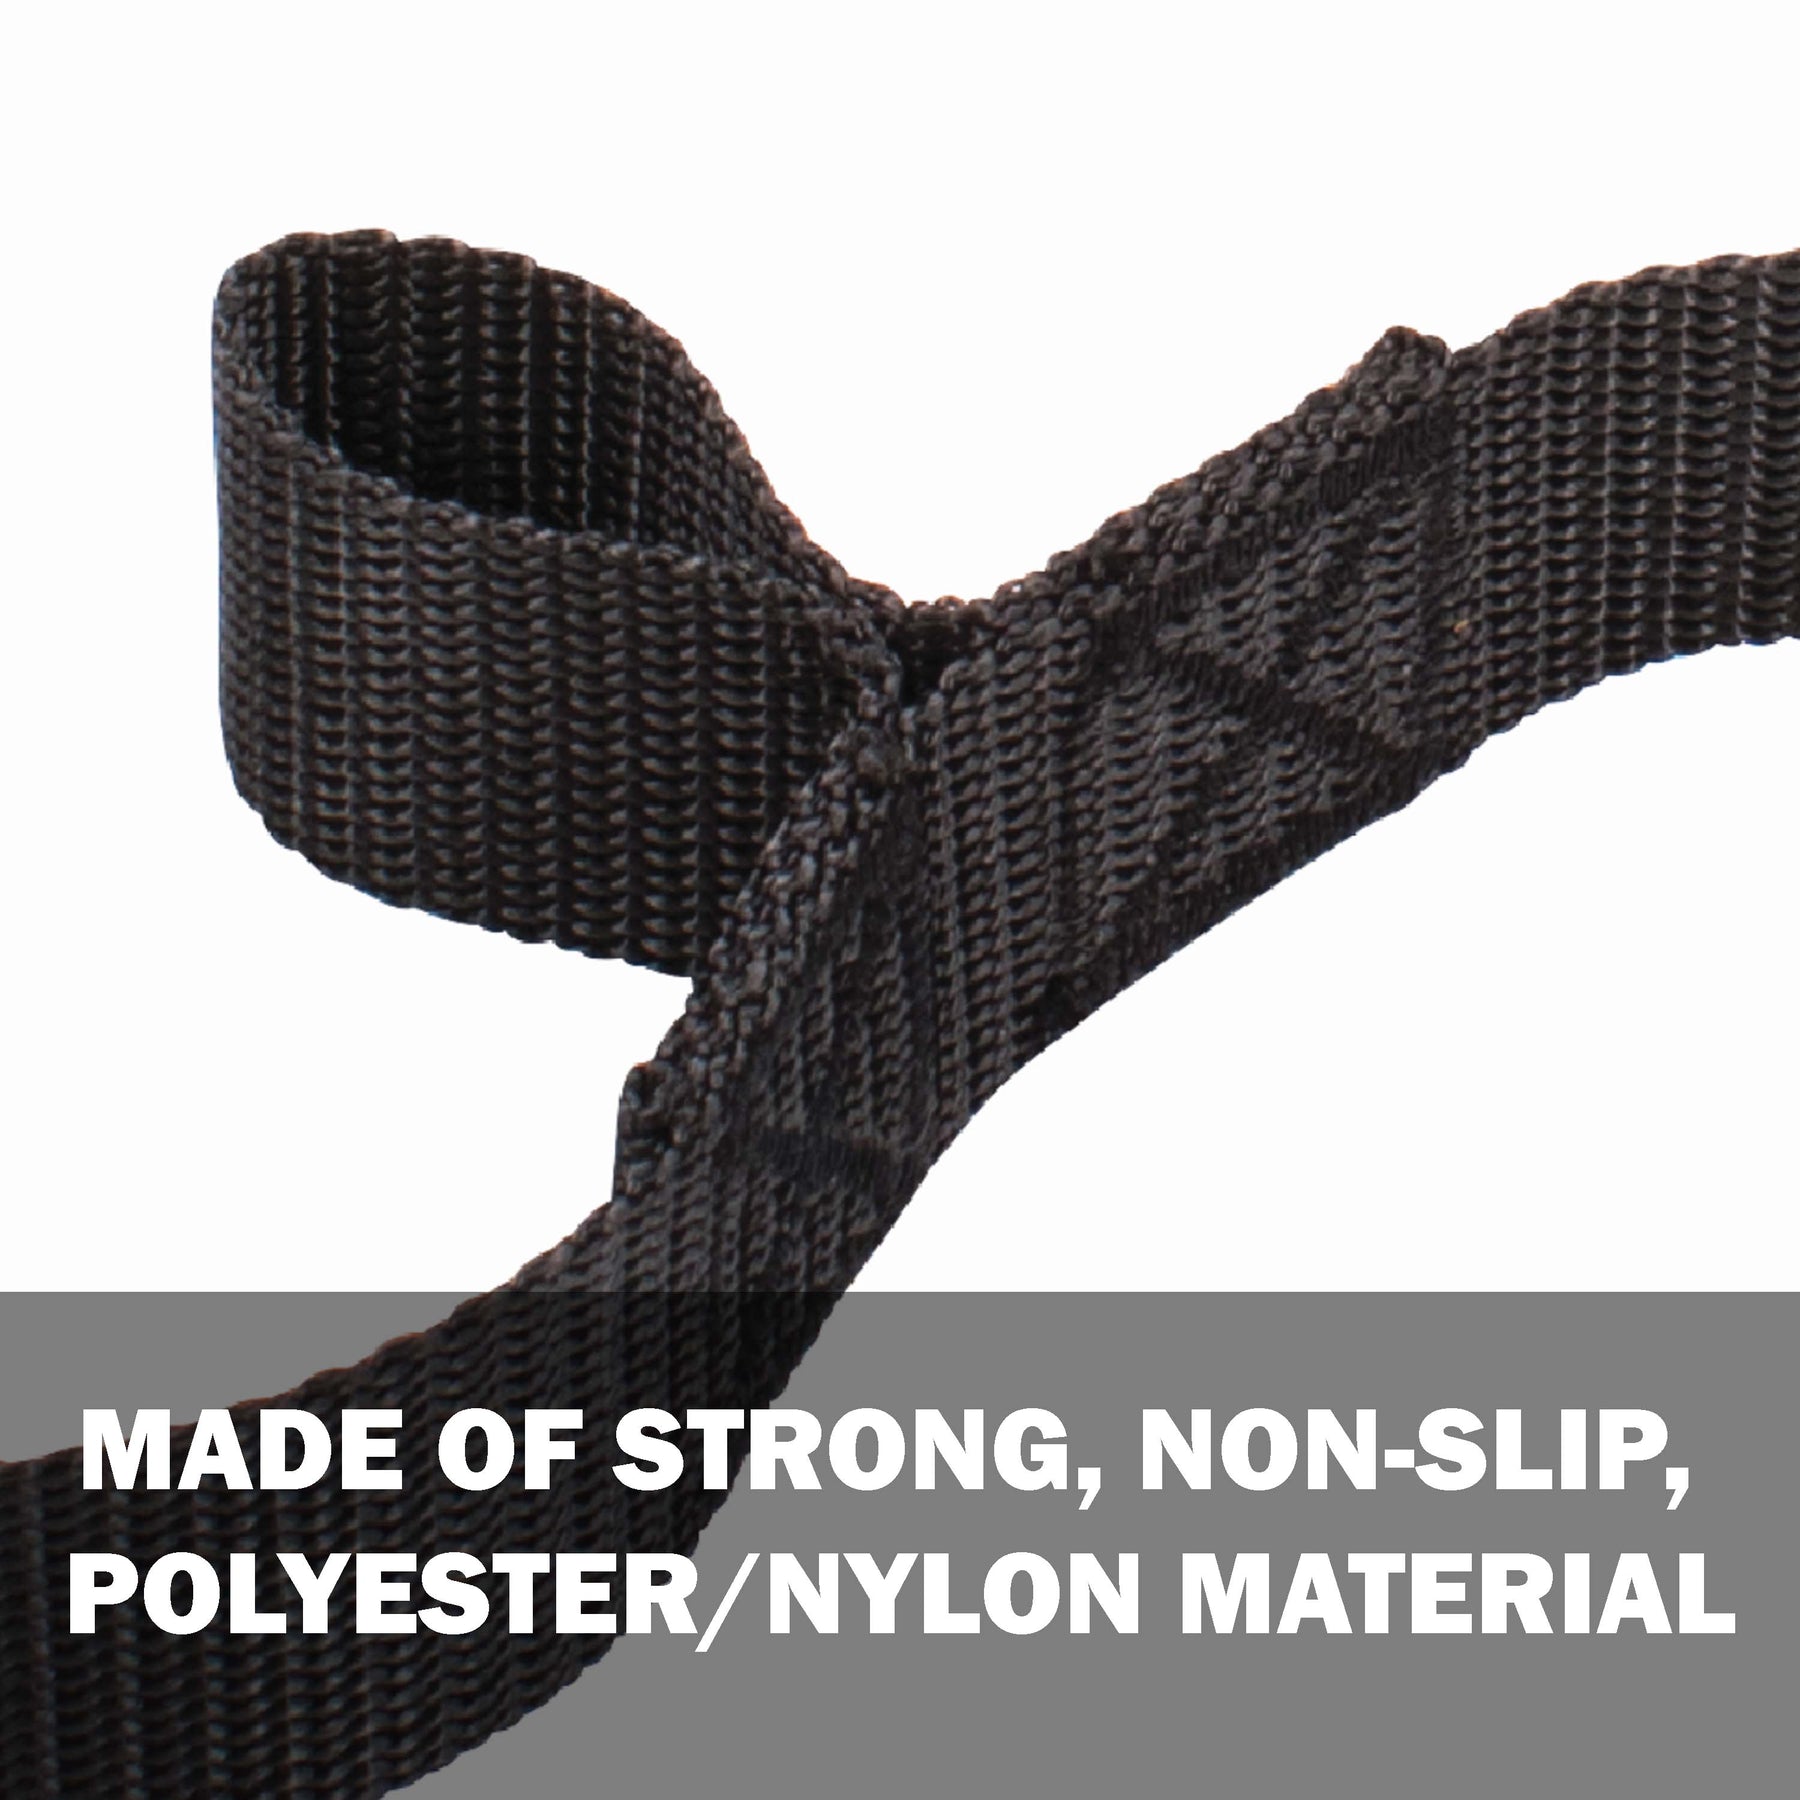 Made of strong, non-slip polyester and nylon material.